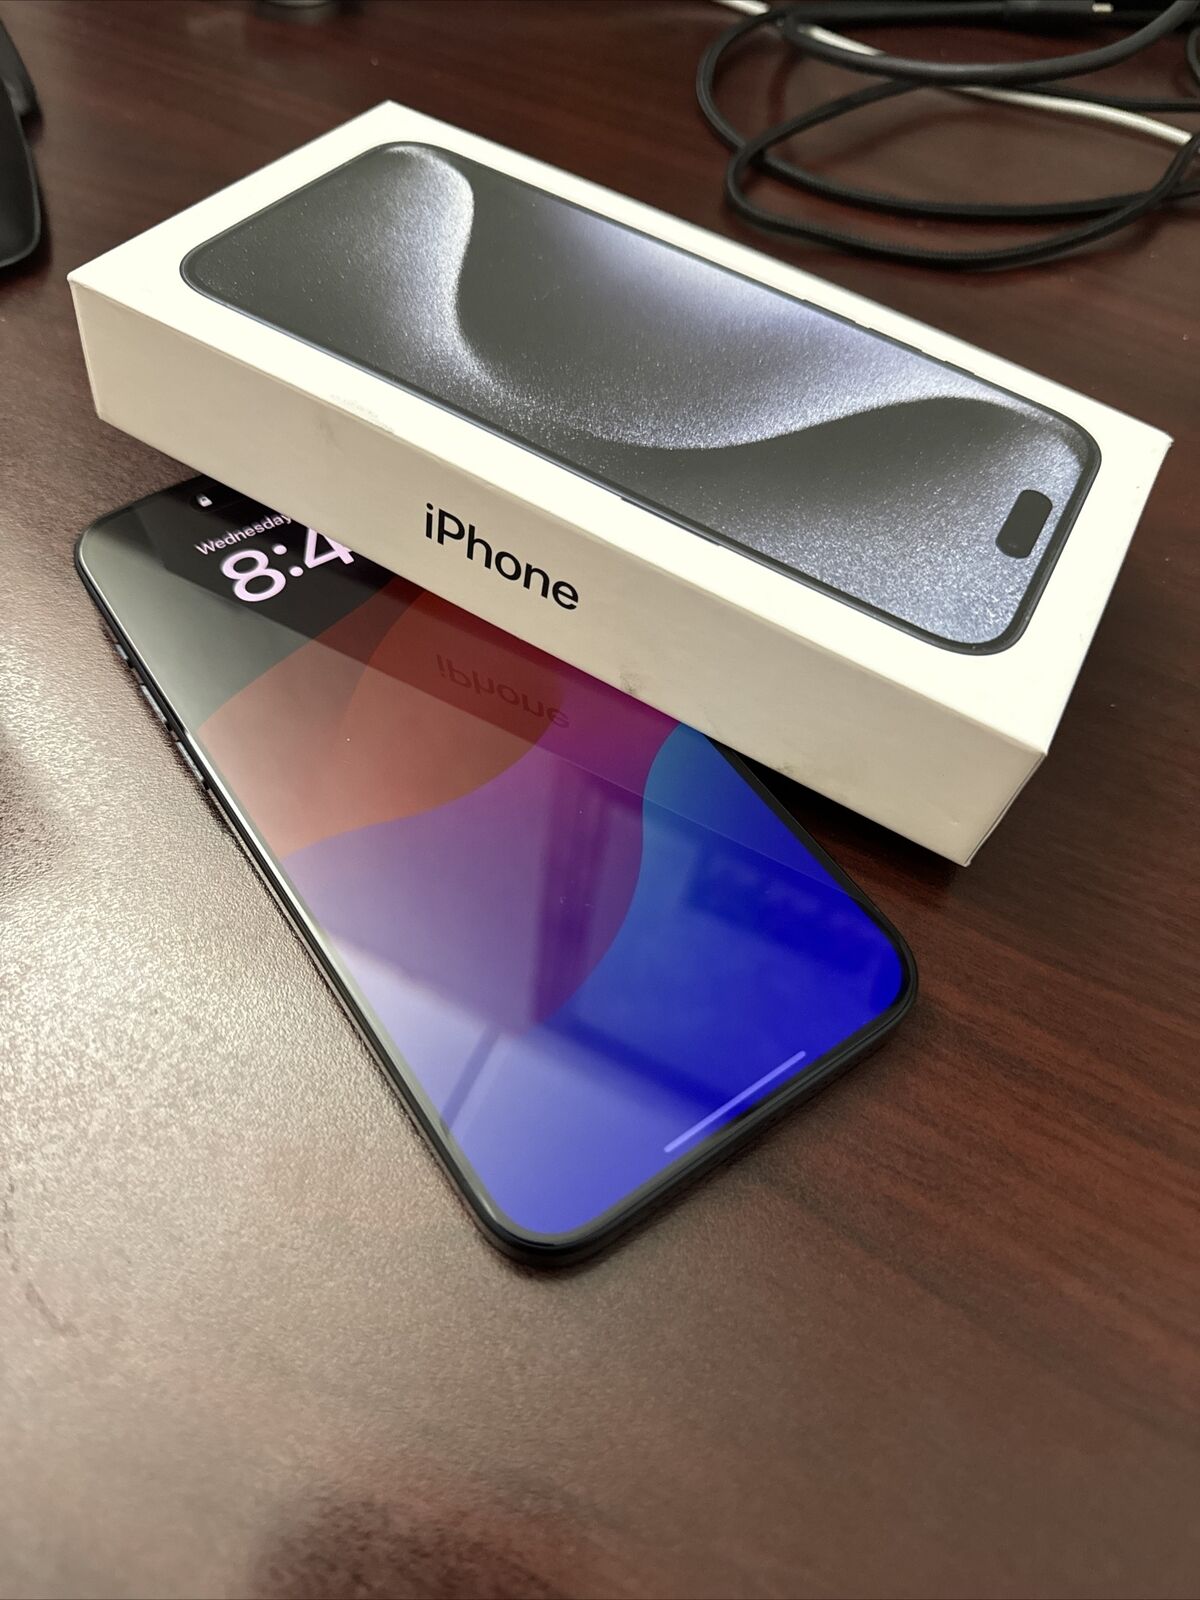 Apple - iPhone 15 PRO MAX - 256gb - Unlocked - Factory Warranty - All ,New Delhi,Mobiles,Free Classifieds,Post Free Ads,77traders.com